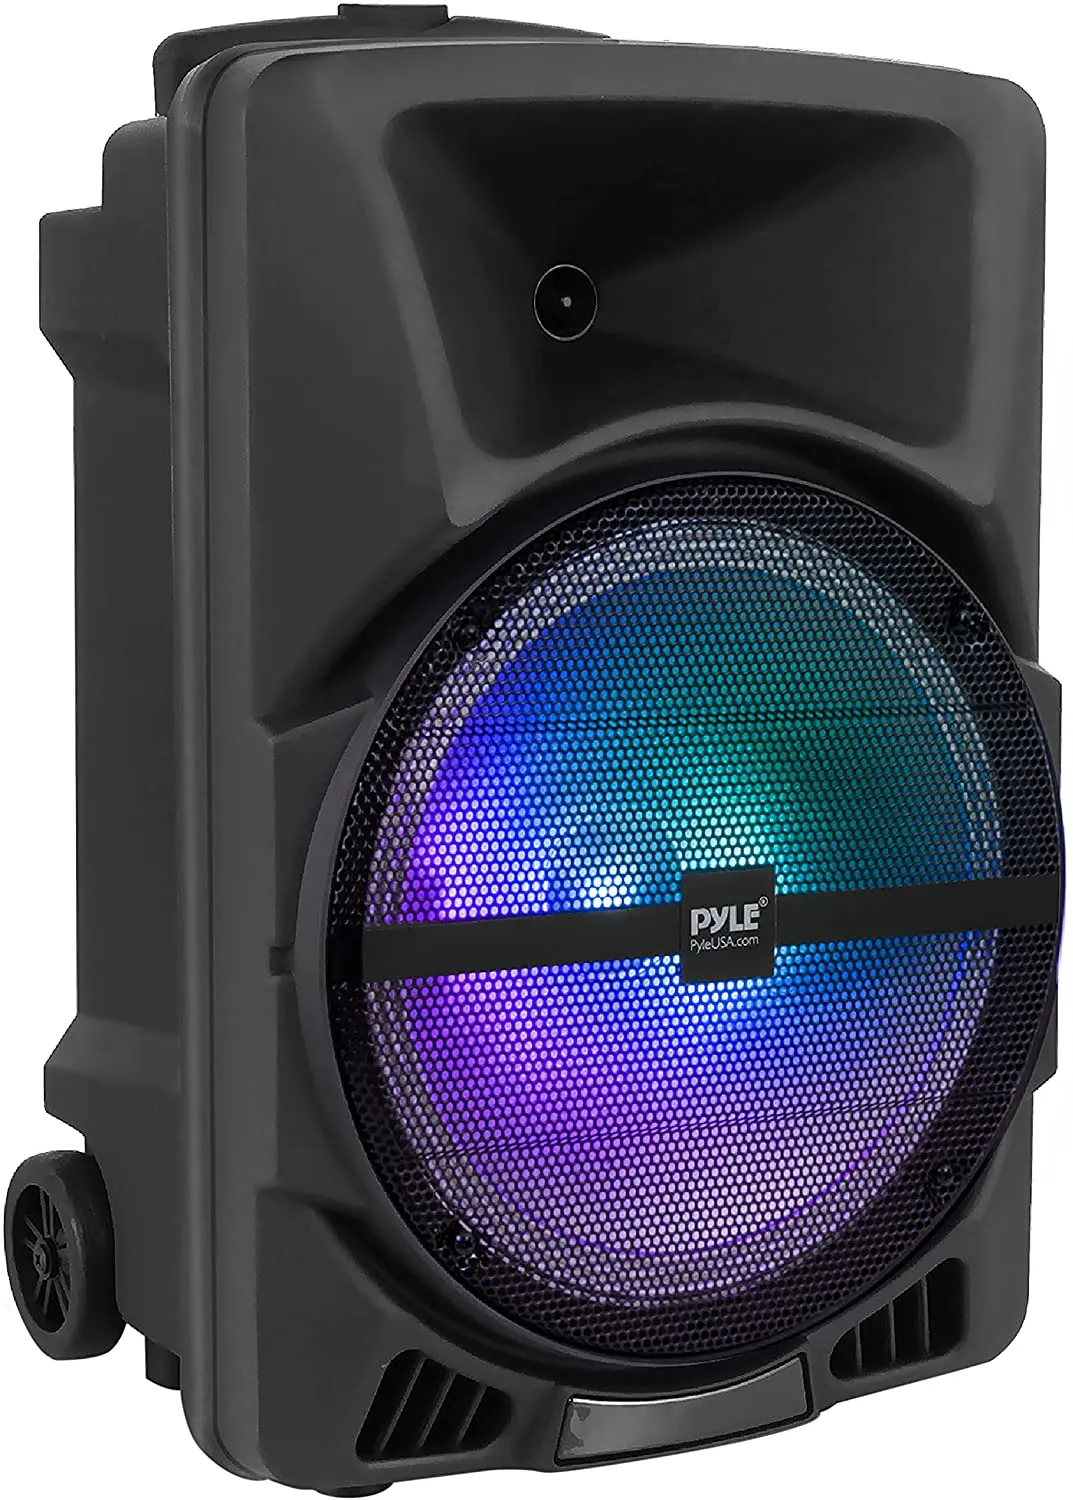 

New Low price Pyle Wireless Portable PA Speaker System - 800W Powered Bluetooth Indoor & Outdoor Stereo Loudspeaker